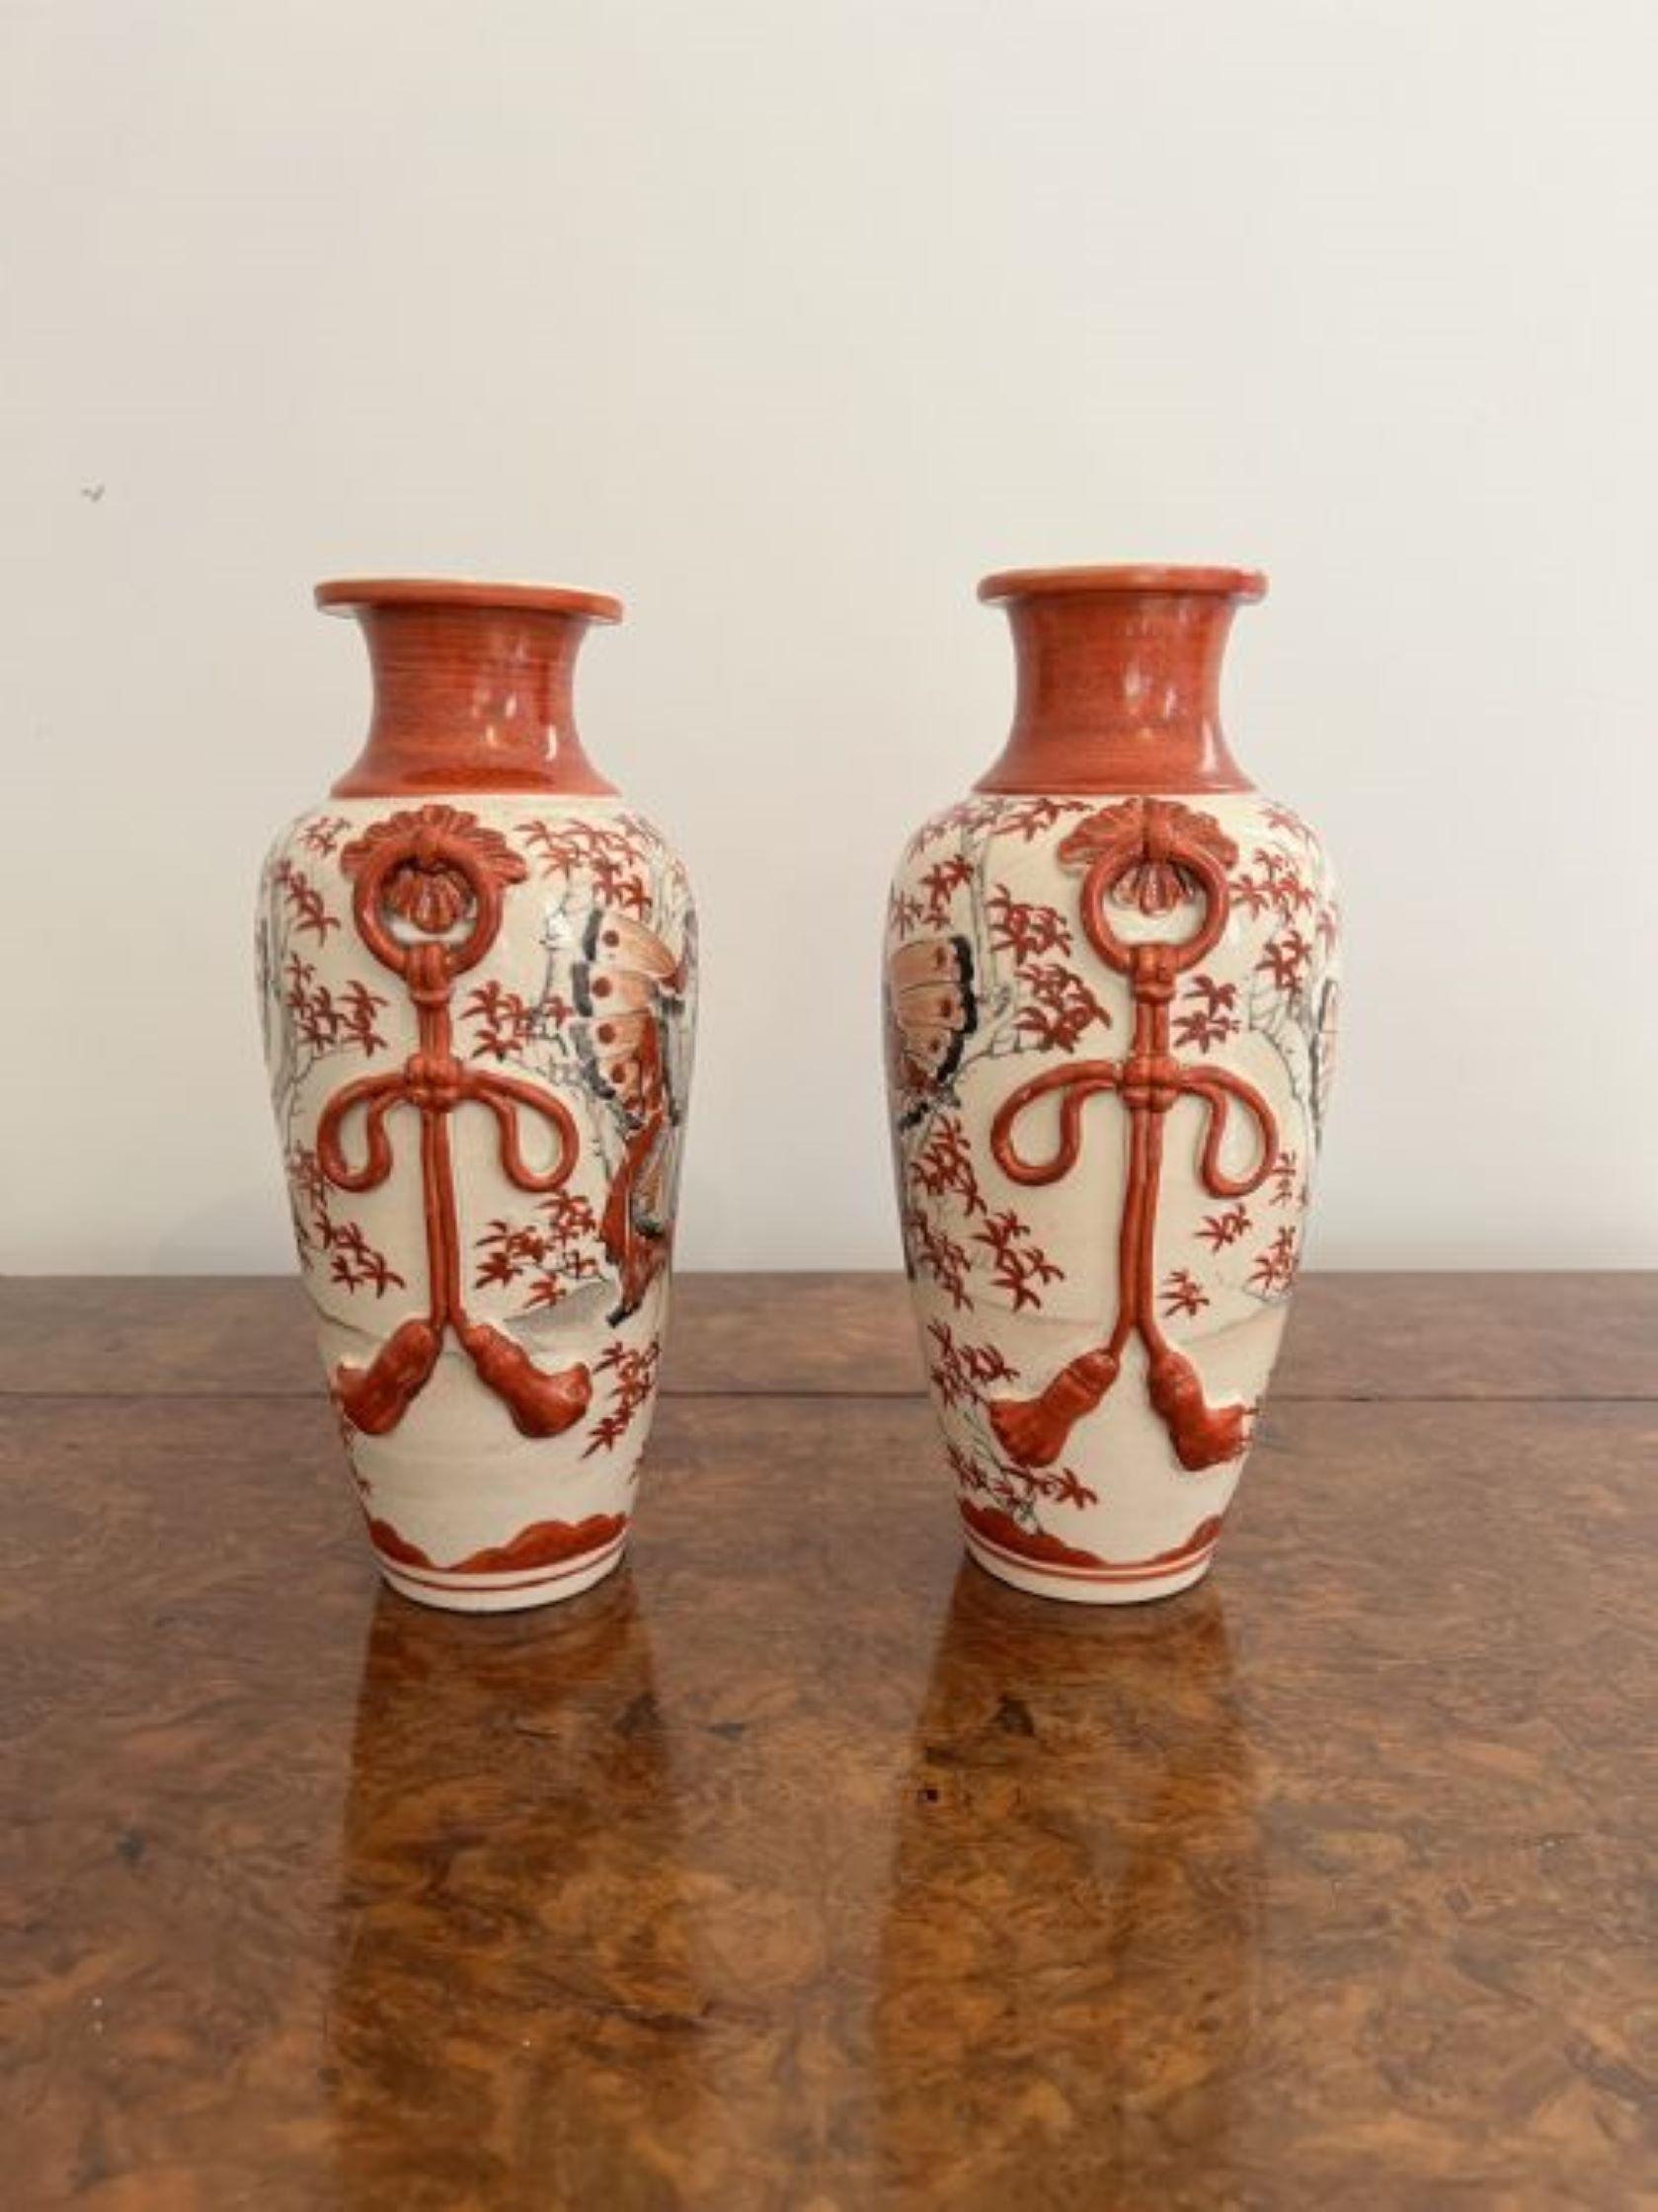 Quality pair of antique Satsuma vases having a quality pair of satsuma vases hand painted with wonderful decorated panels of traditional figures, leaves and trees in fantastic red, grey, black and white colours raised on circular bases.